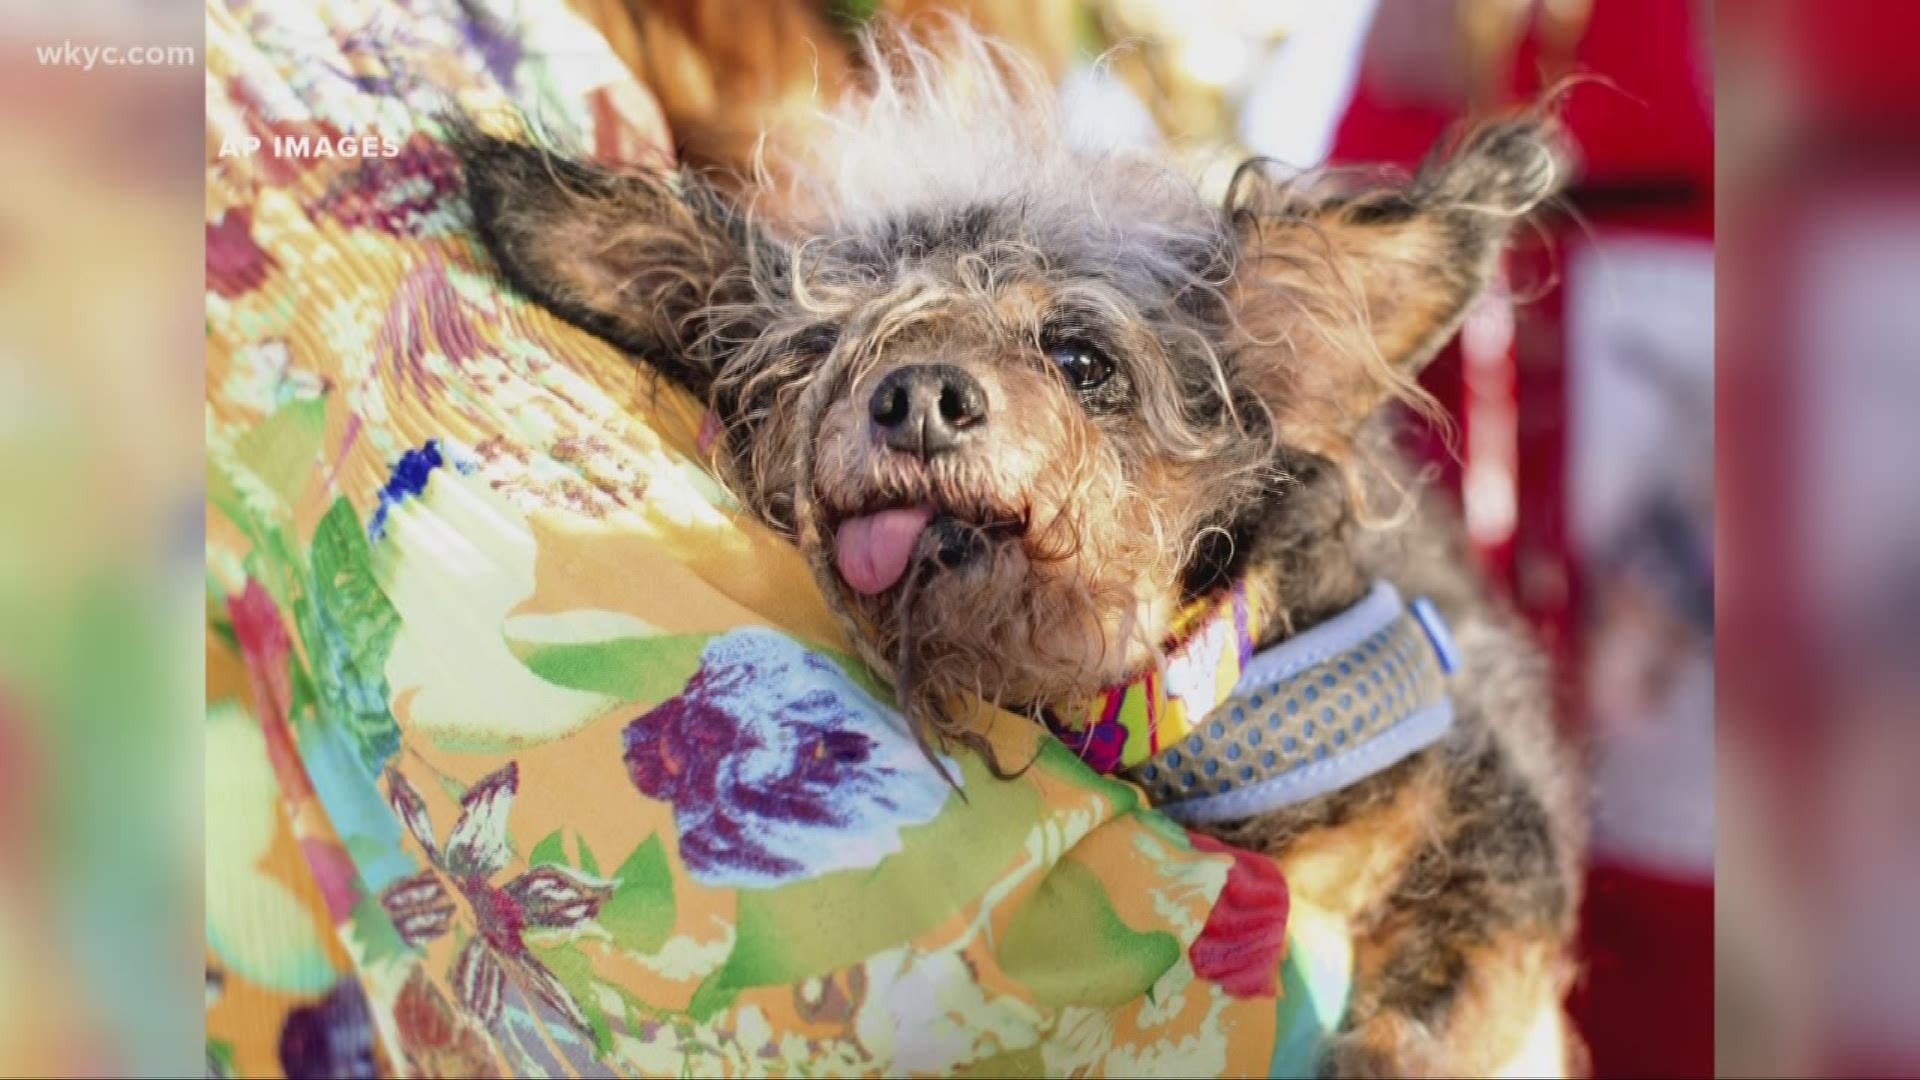 June 24, 2019 (AP): Scamp the Tramp will never win a beauty contest. But he's won an ugly one. The bug-eyed, dreadlocked pooch took top honors Friday night at the 31st annual World's Ugliest Dog Contest. Owner Yvonne Morones of Santa Rosa, California, won an appearance with Scamp on the 'Today' show, $1,500 in cash, another $1,500 to donate to an animal shelter — and a trophy the size of a Rottweiler.